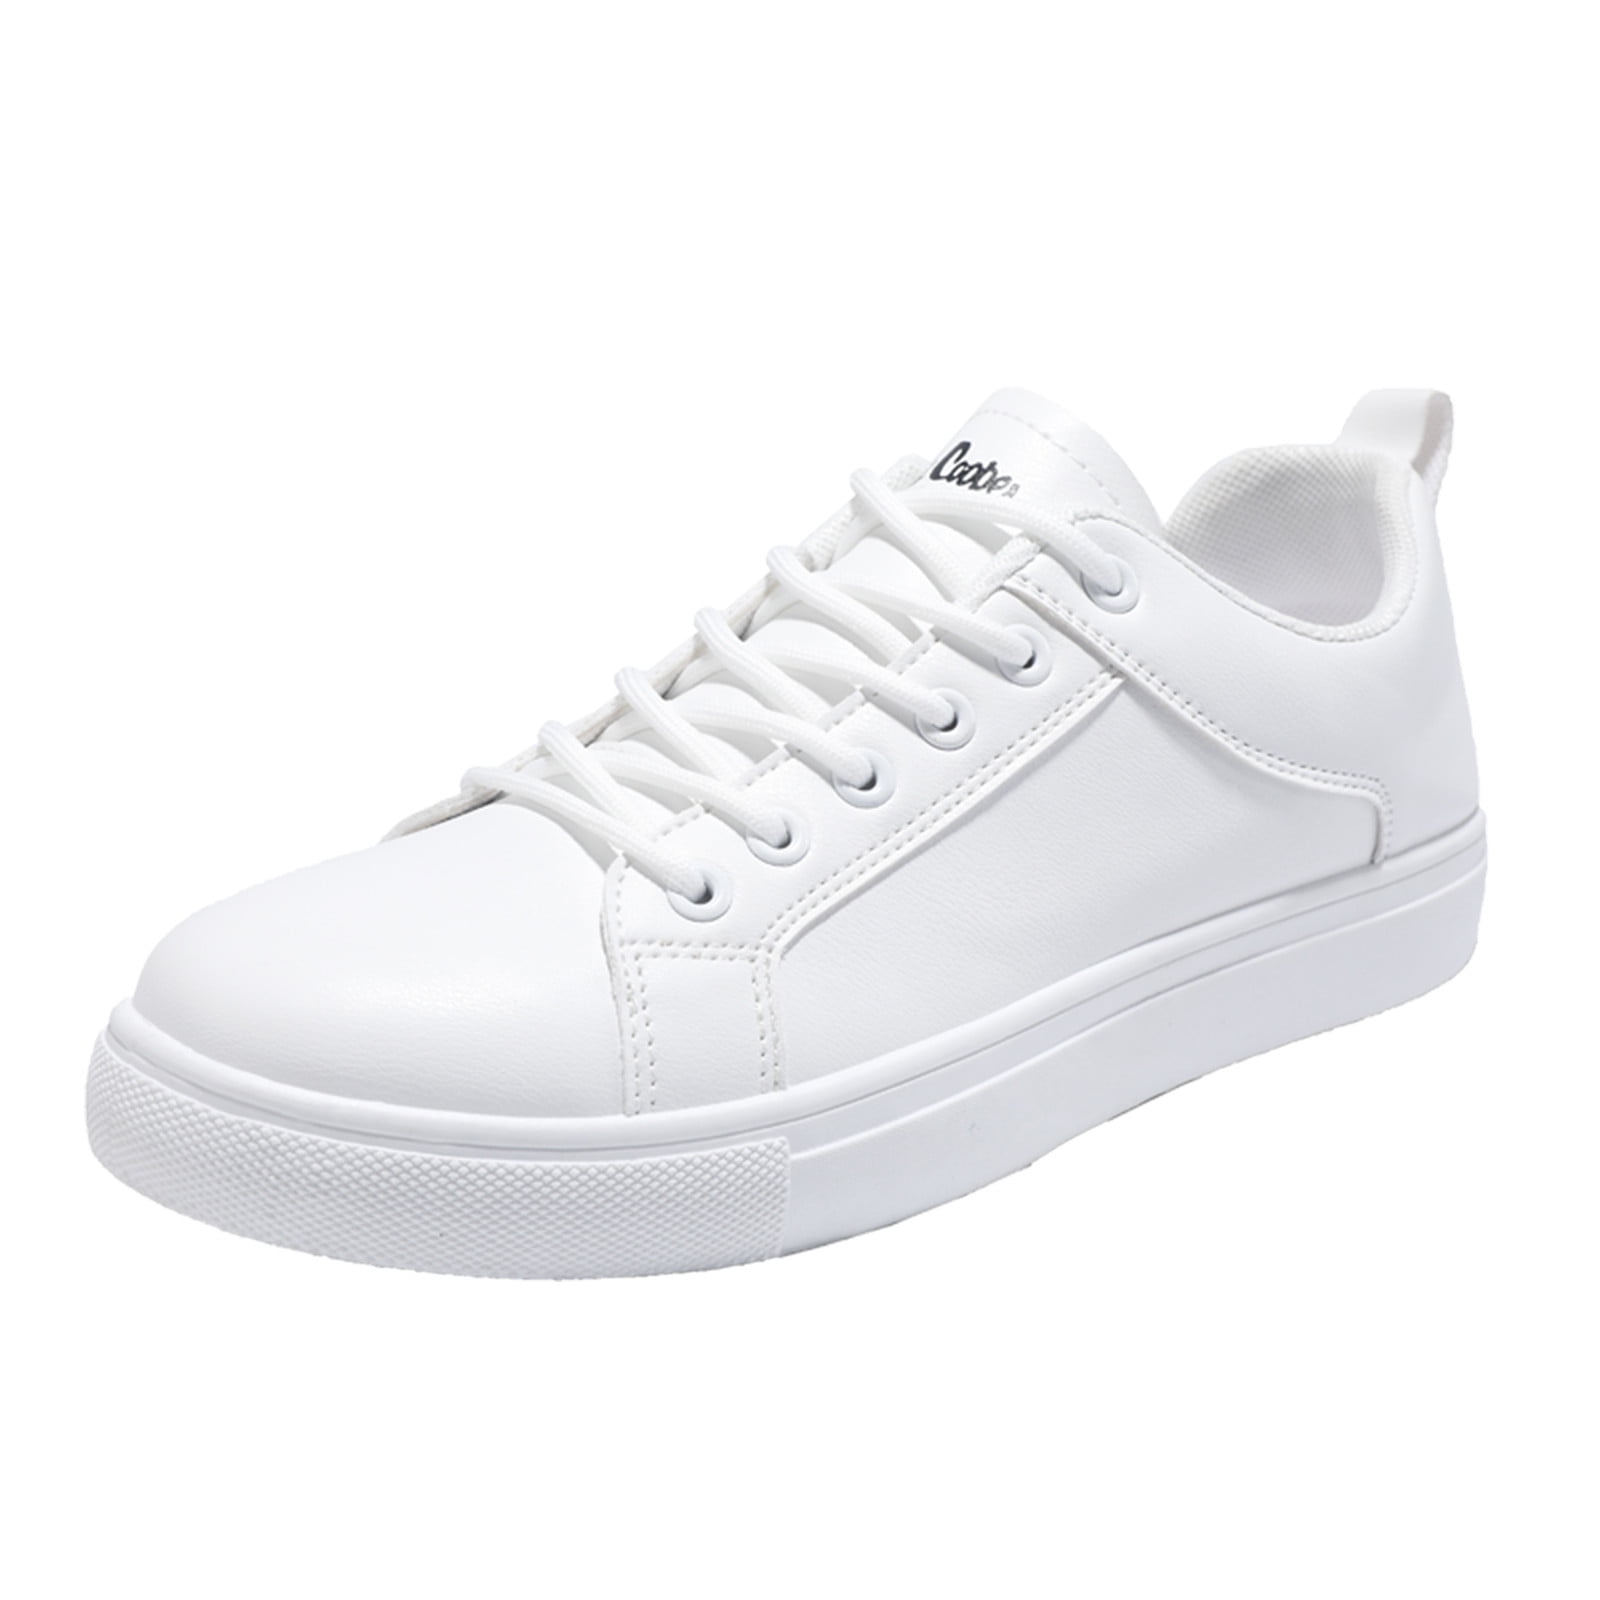 Best White Sneakers for Women to Wear with Dresses | Bella Style Living